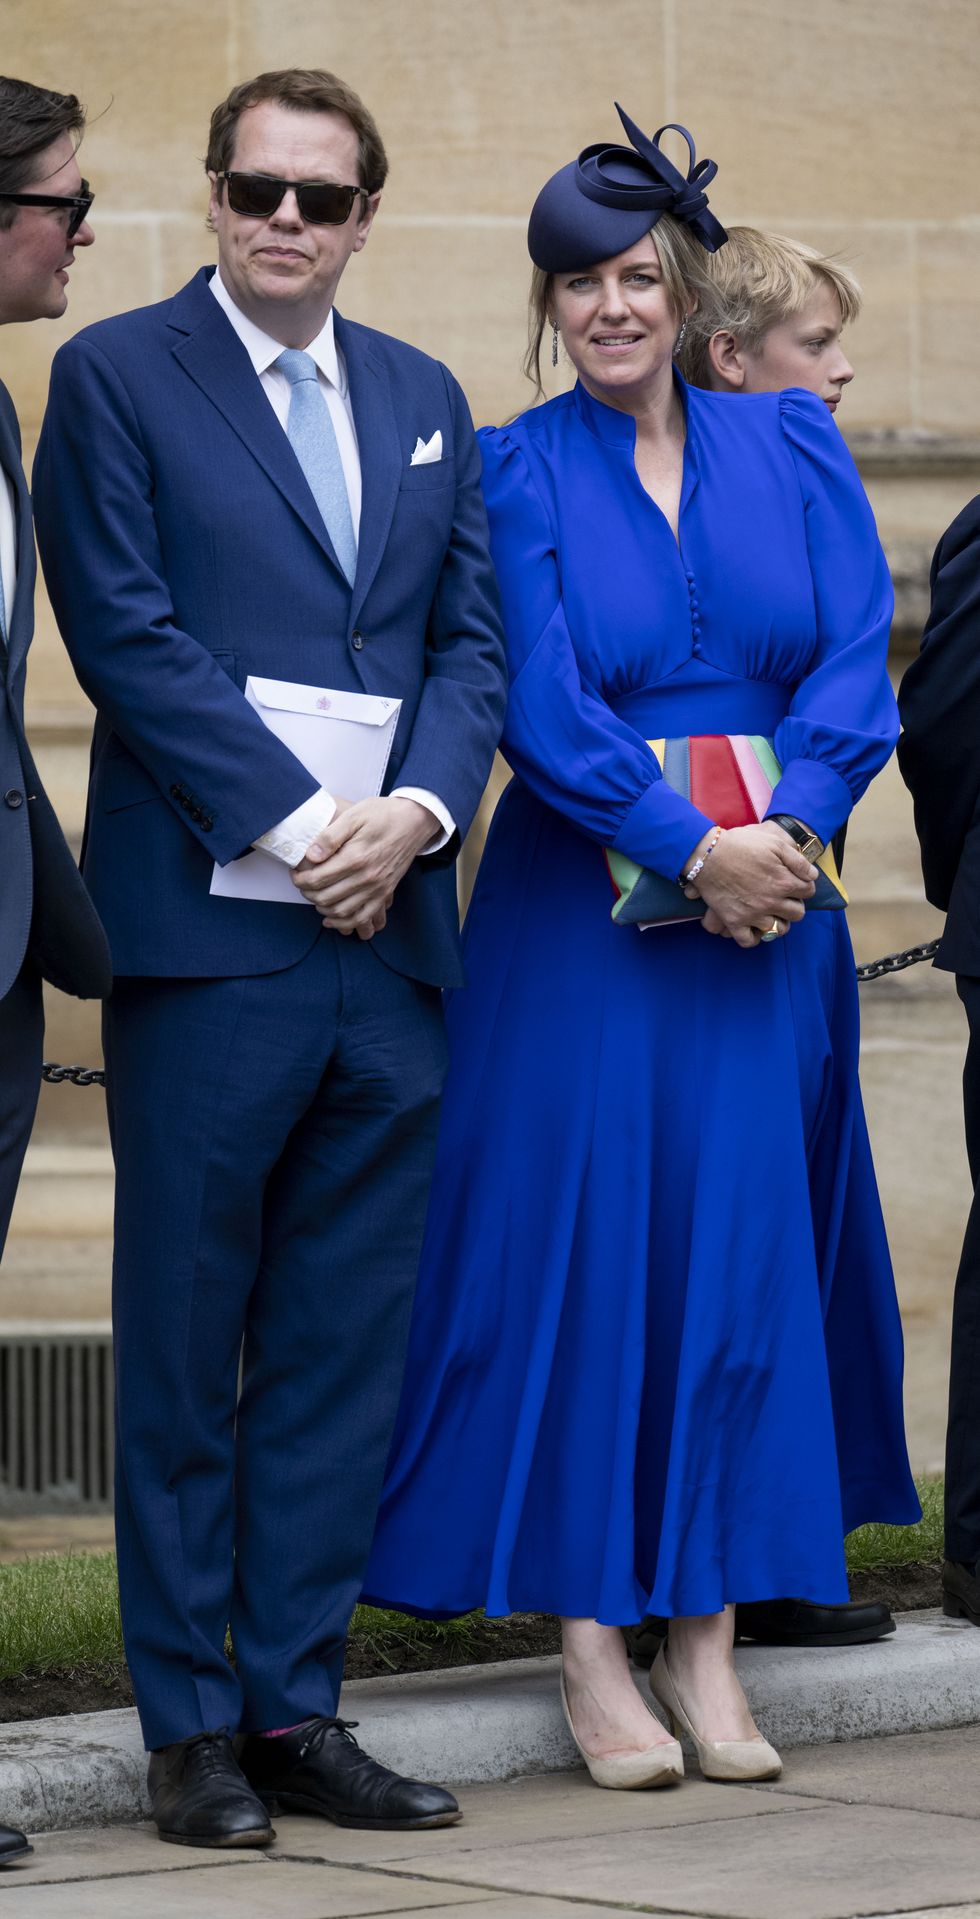 Laura Lopes and Tom Parker Bowles attend the Order of the Garter service